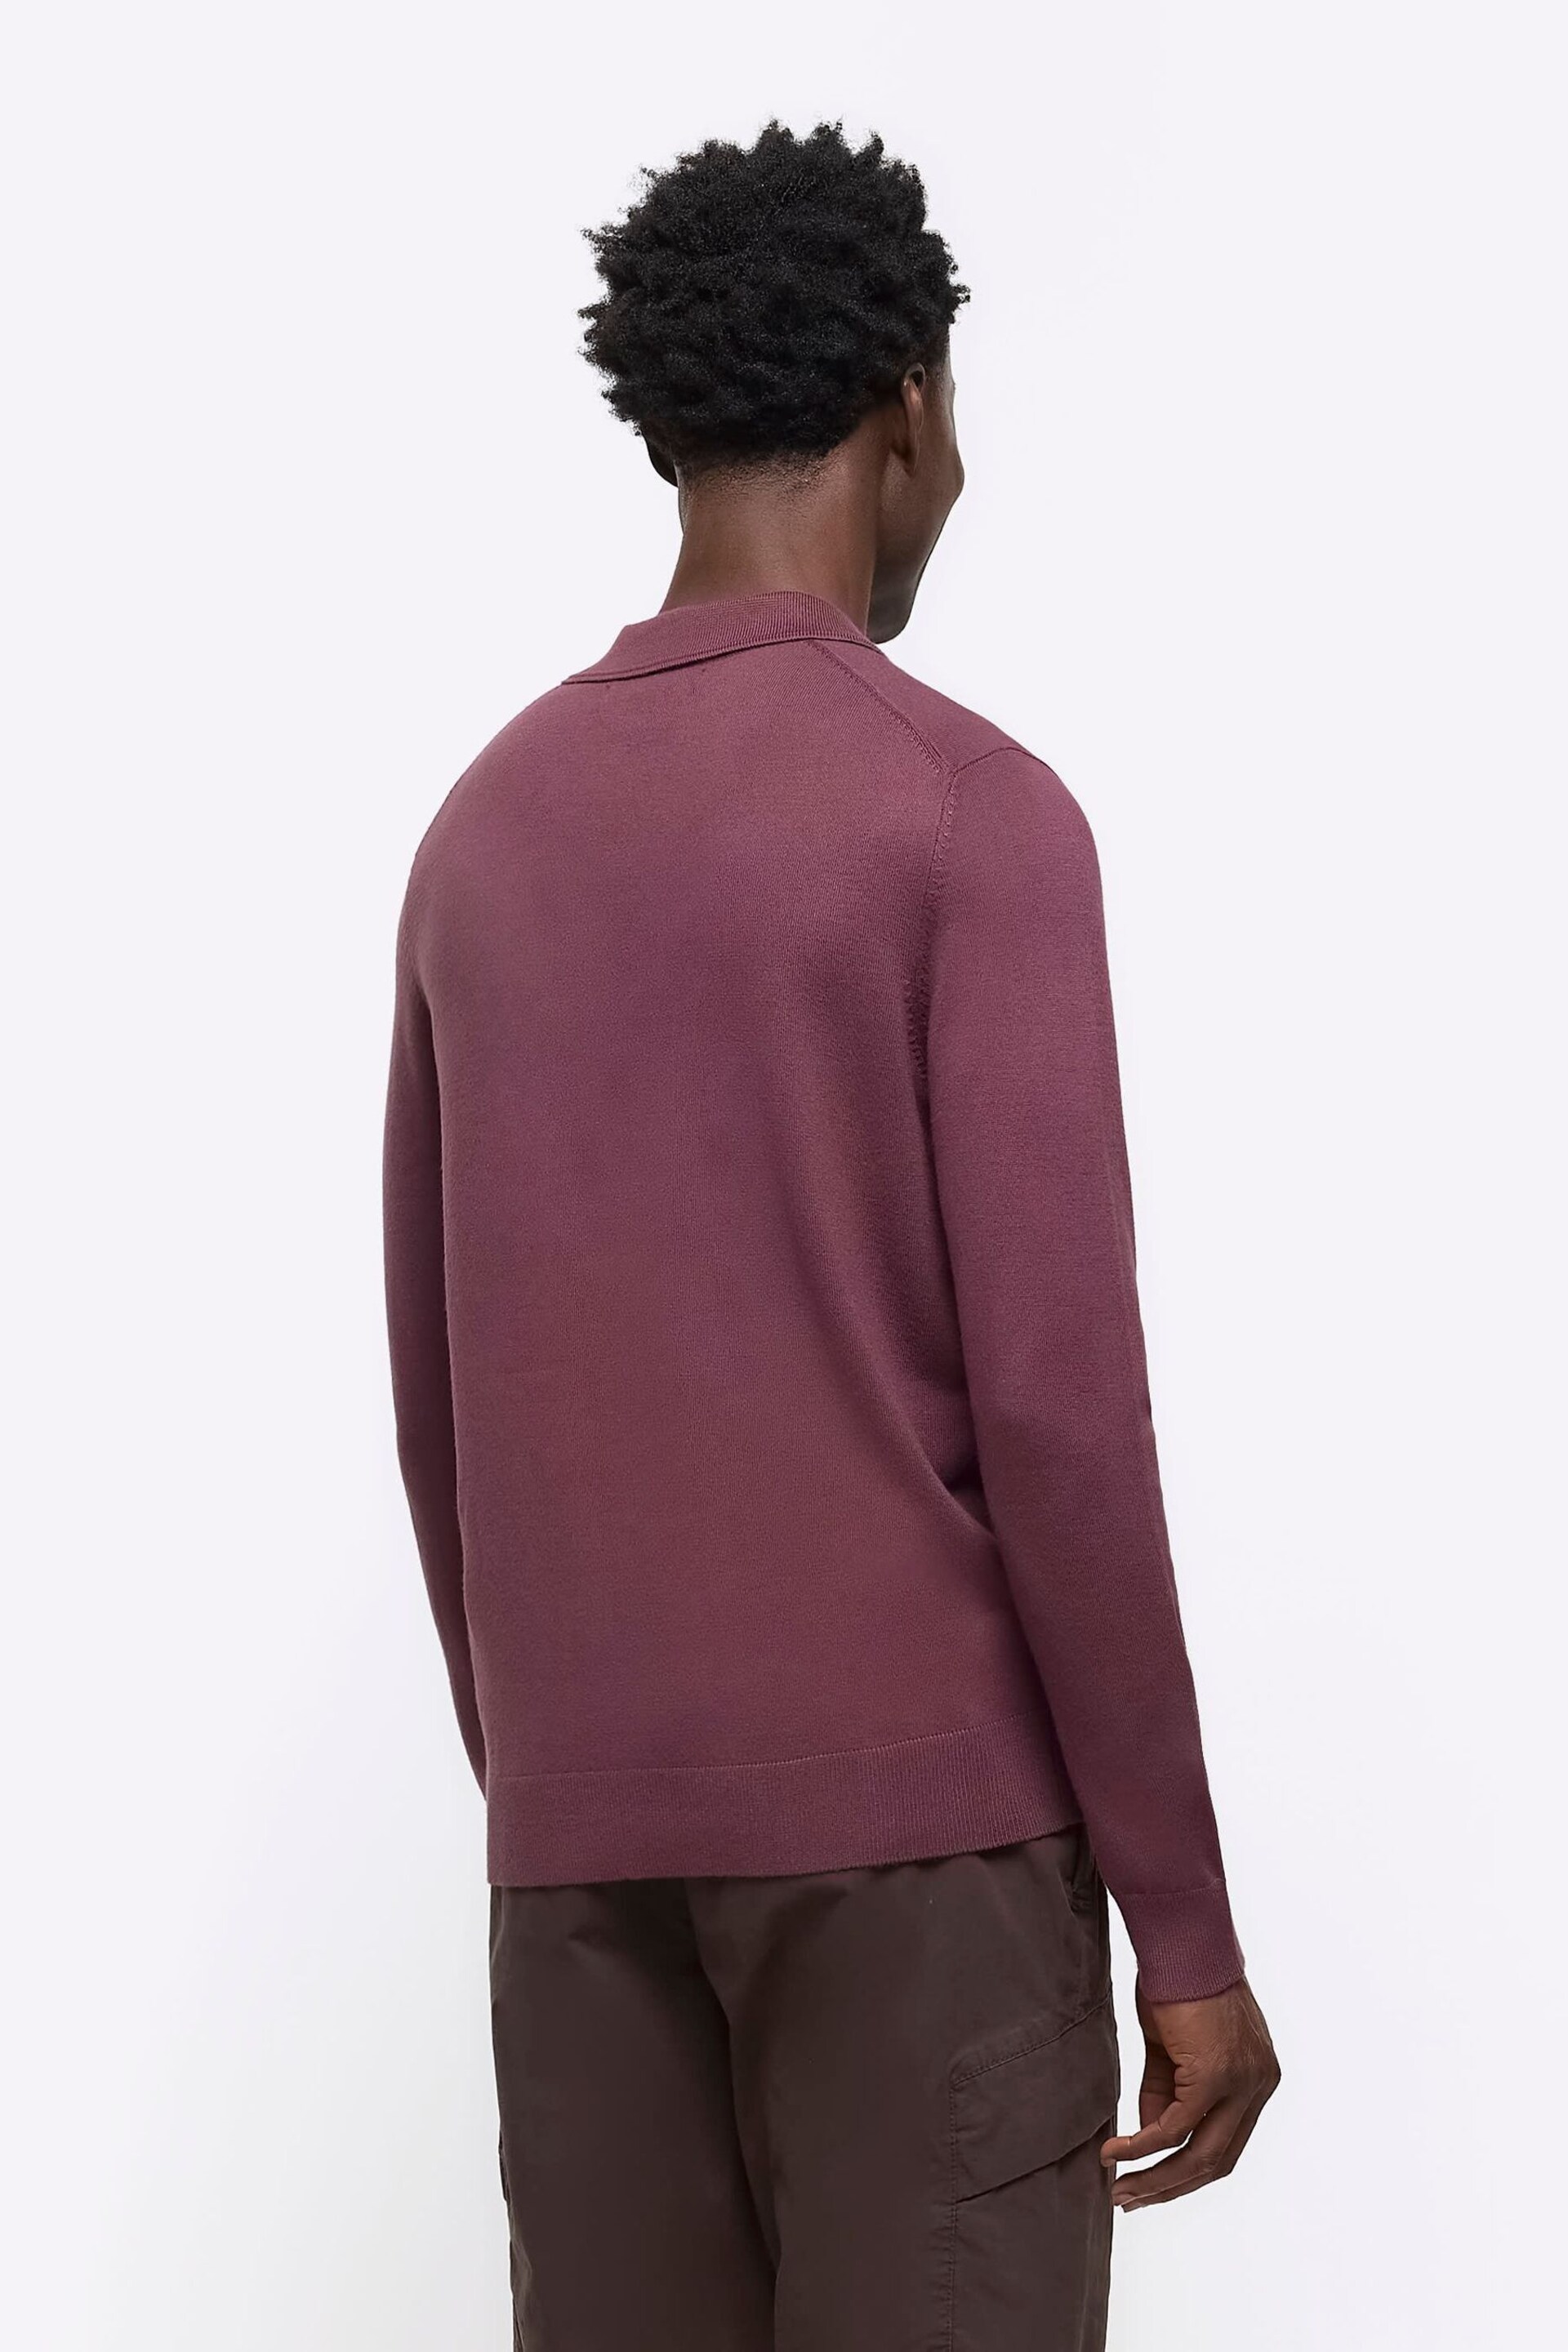 River Island Purple Knitted Polo Jumper - Image 2 of 6